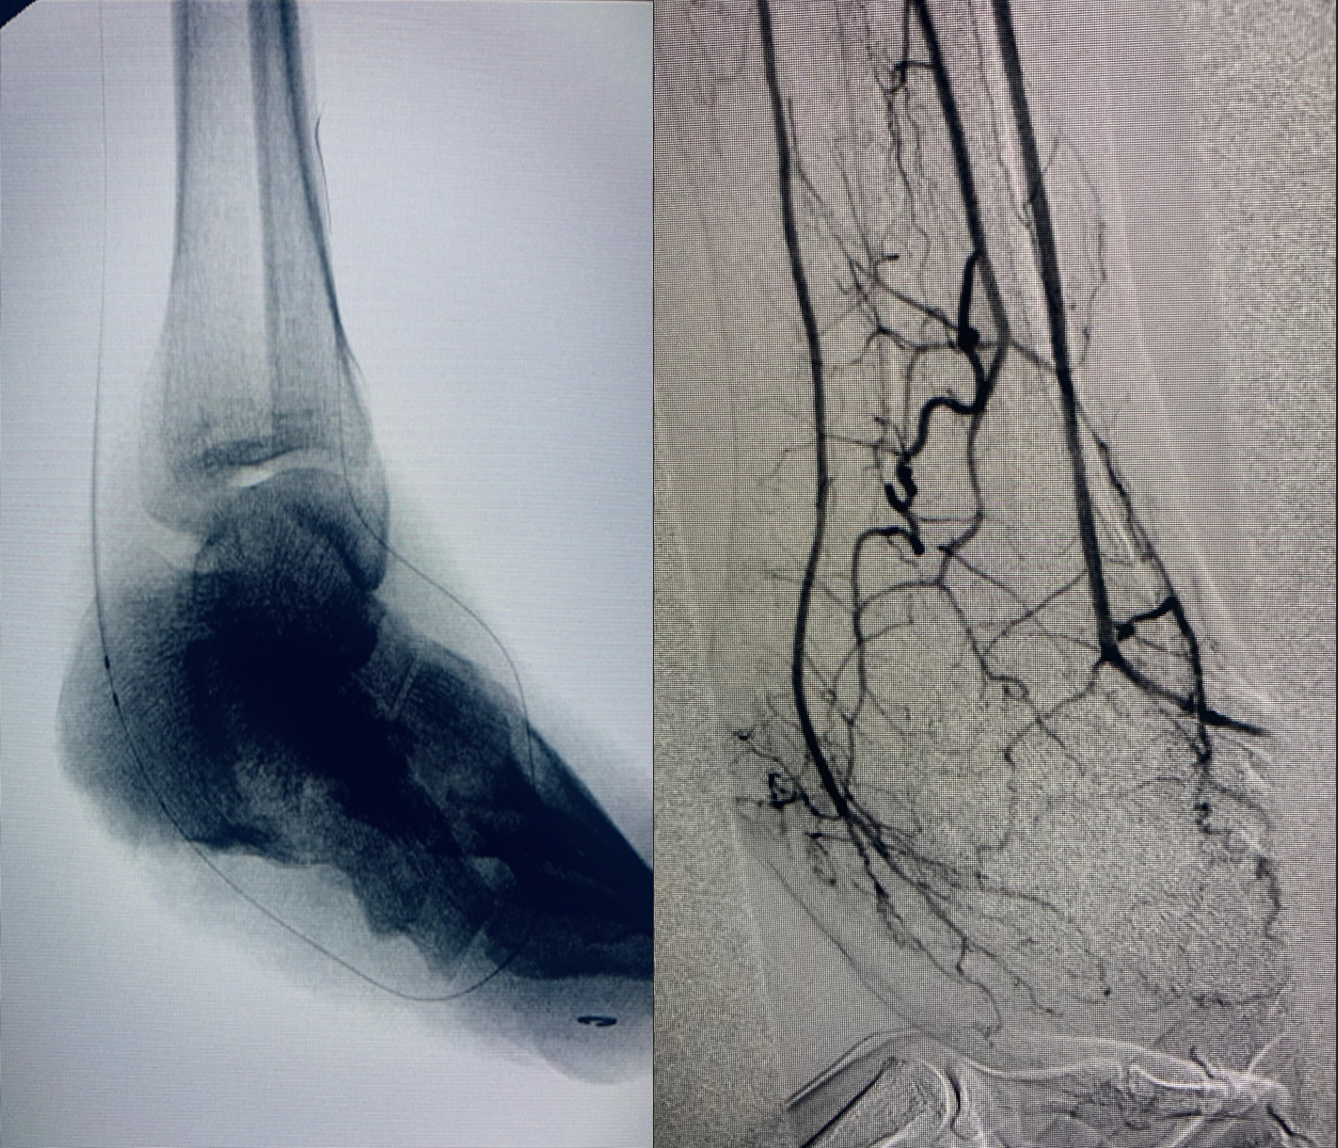 Repeat angiography again revealed an occluded distal PT, which was treated aggressively with atherectomy and angioplasty to reestablish the pedal loop (left). One can see wound blush and a partially revascularized pedal loop after intervention (right).